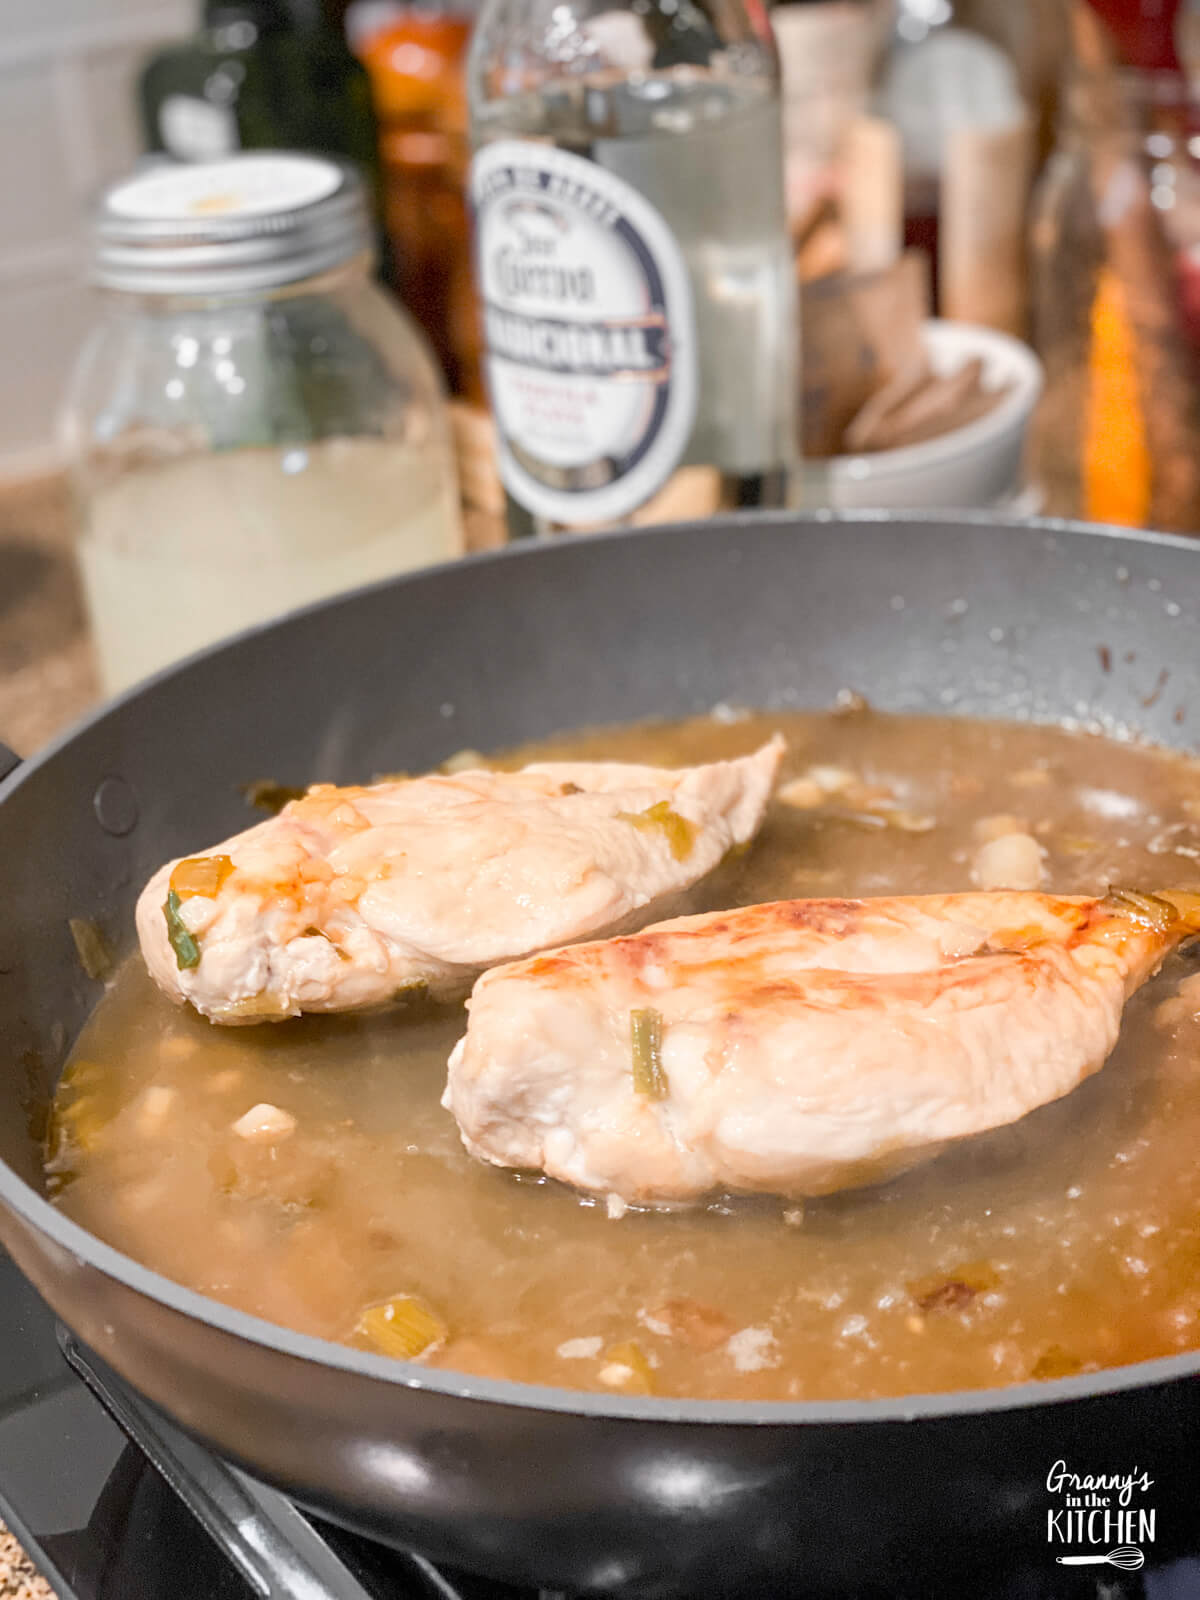 two chicken breasts cooking in a sauté pan, with bottle of tequila in background